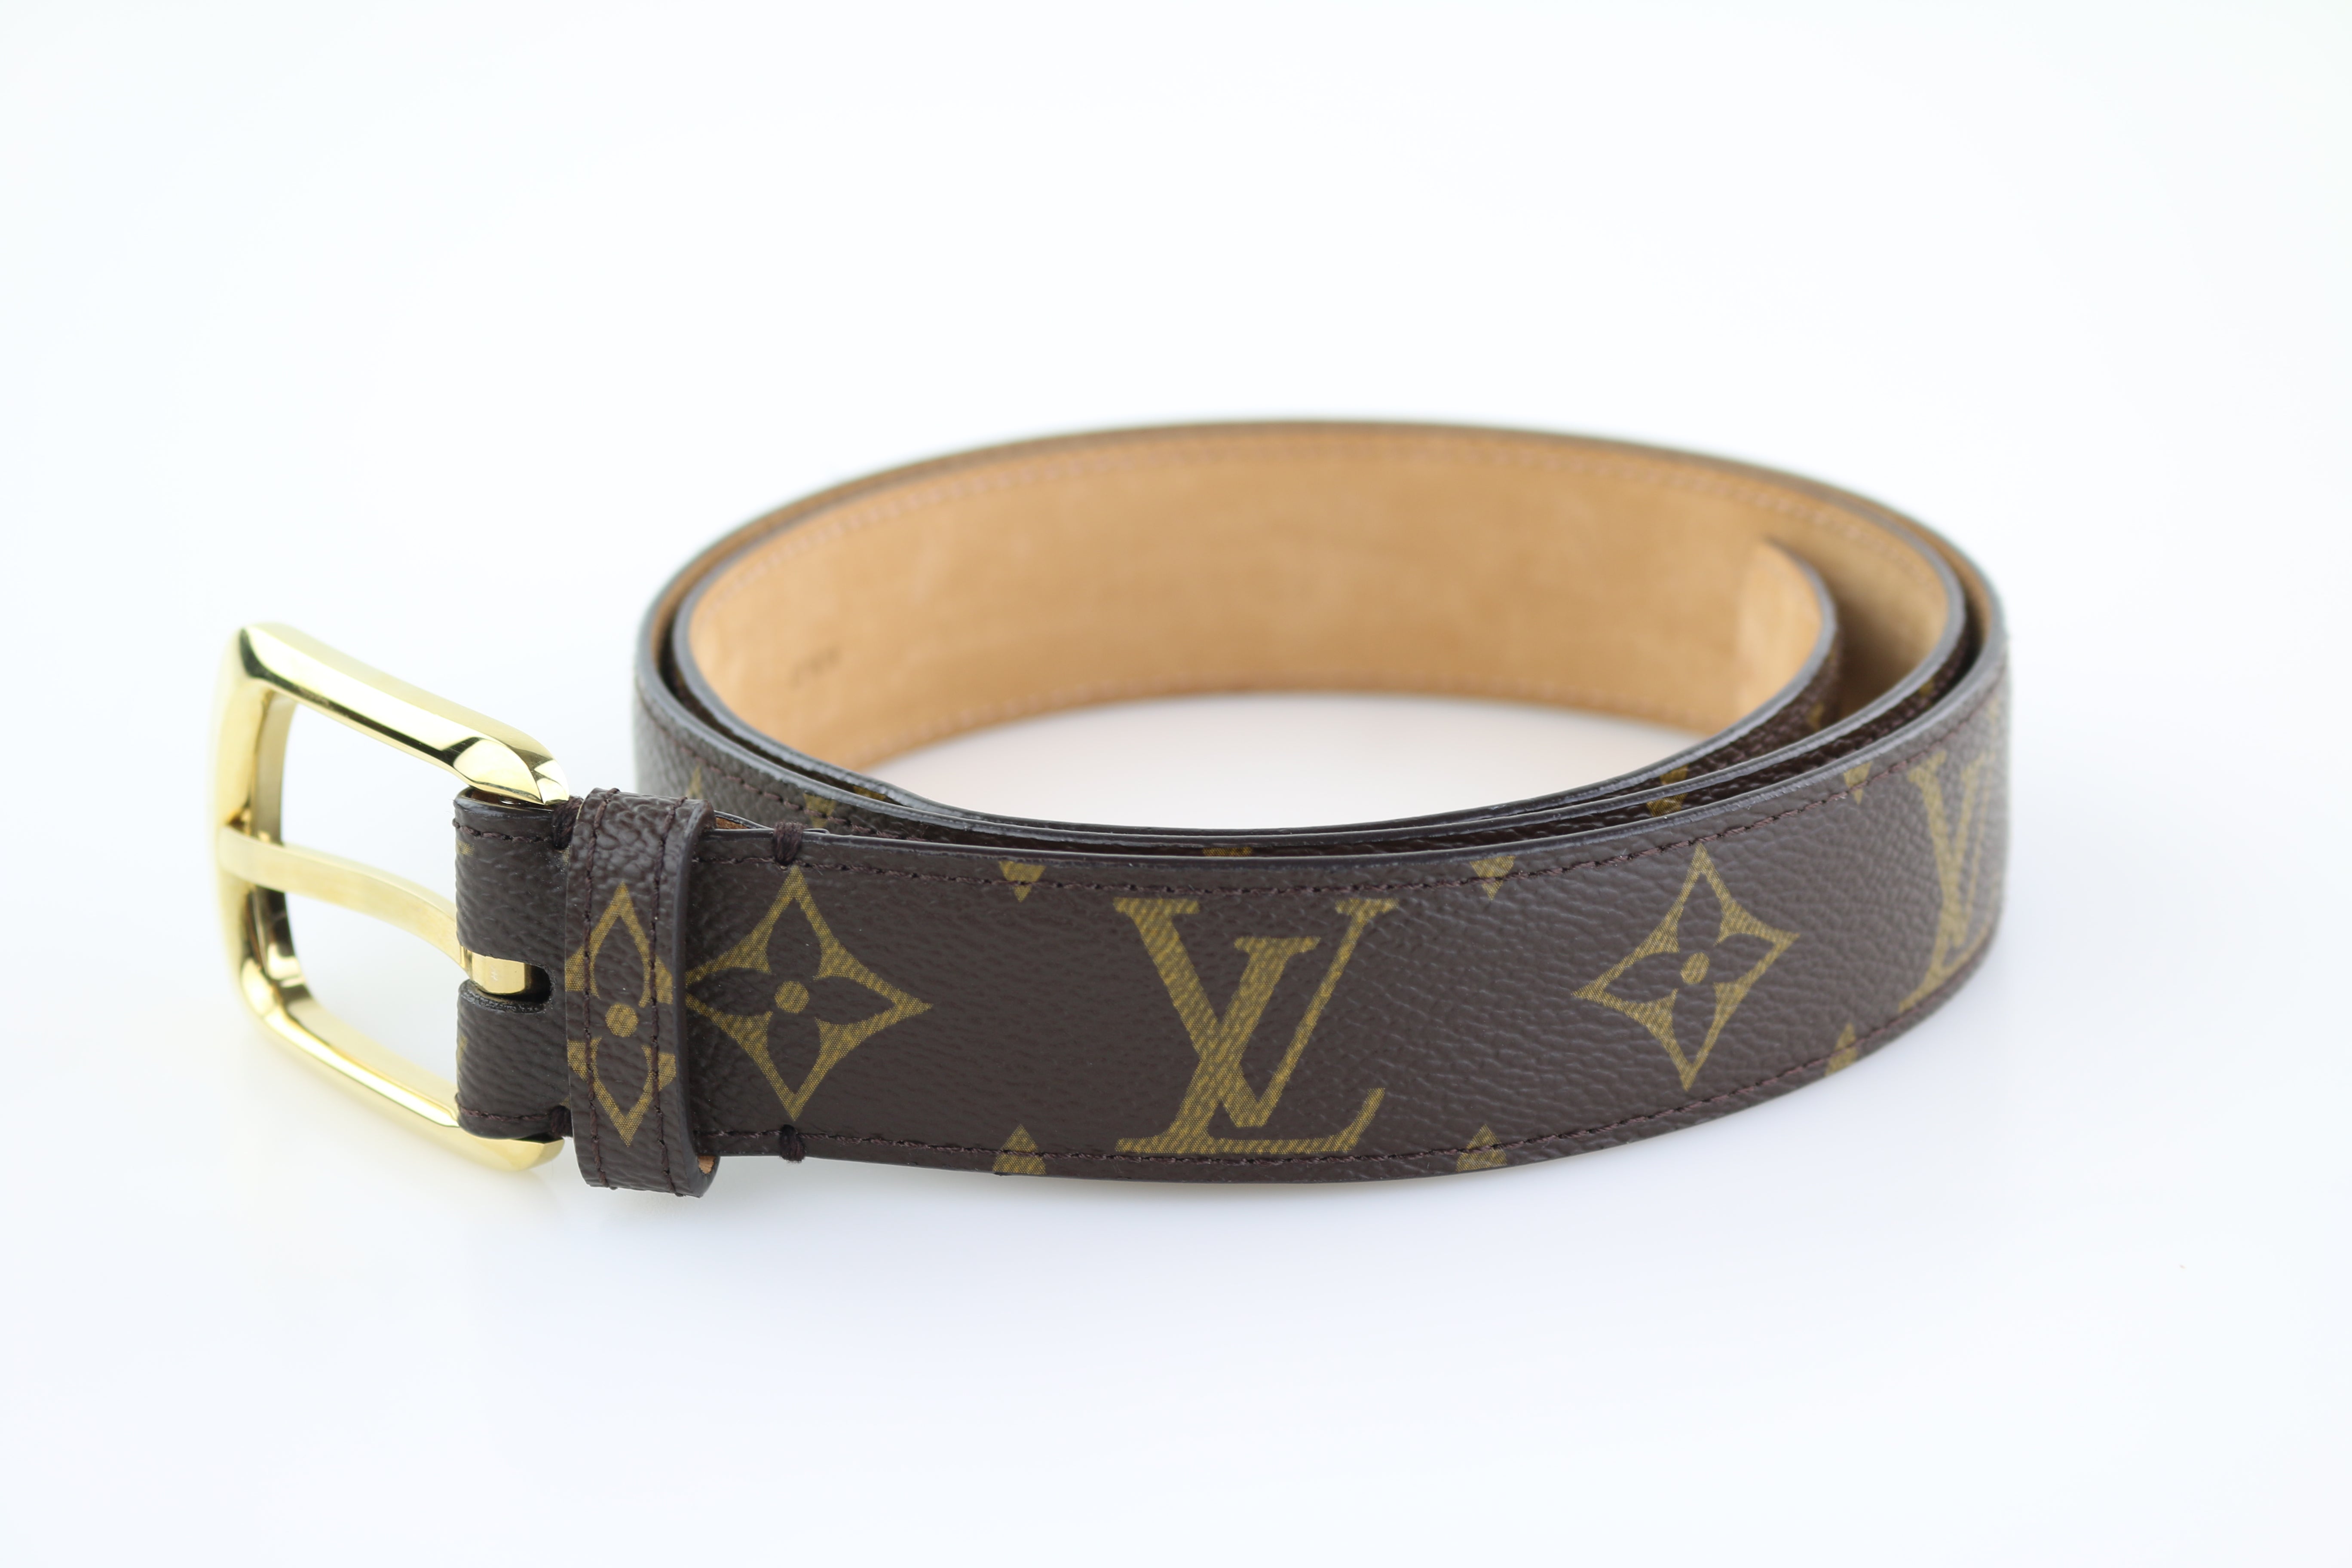 Louis Vuitton - Authenticated Belt - Leather White for Women, Very Good Condition